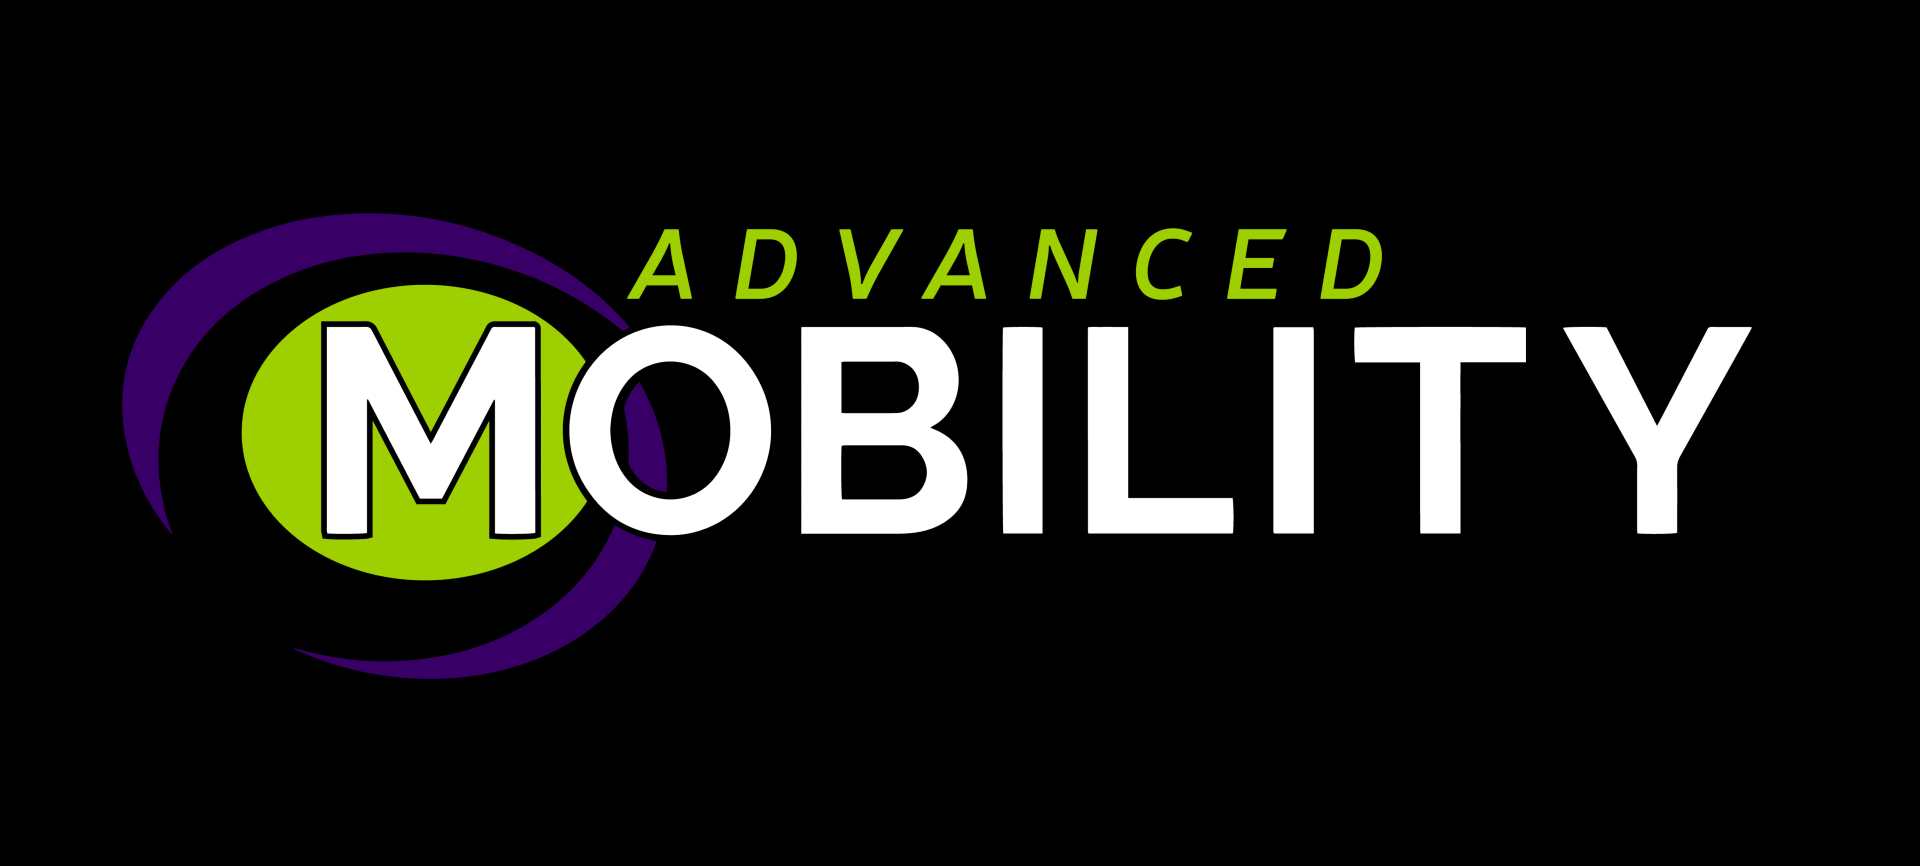 Advanced Mobility Event Hire